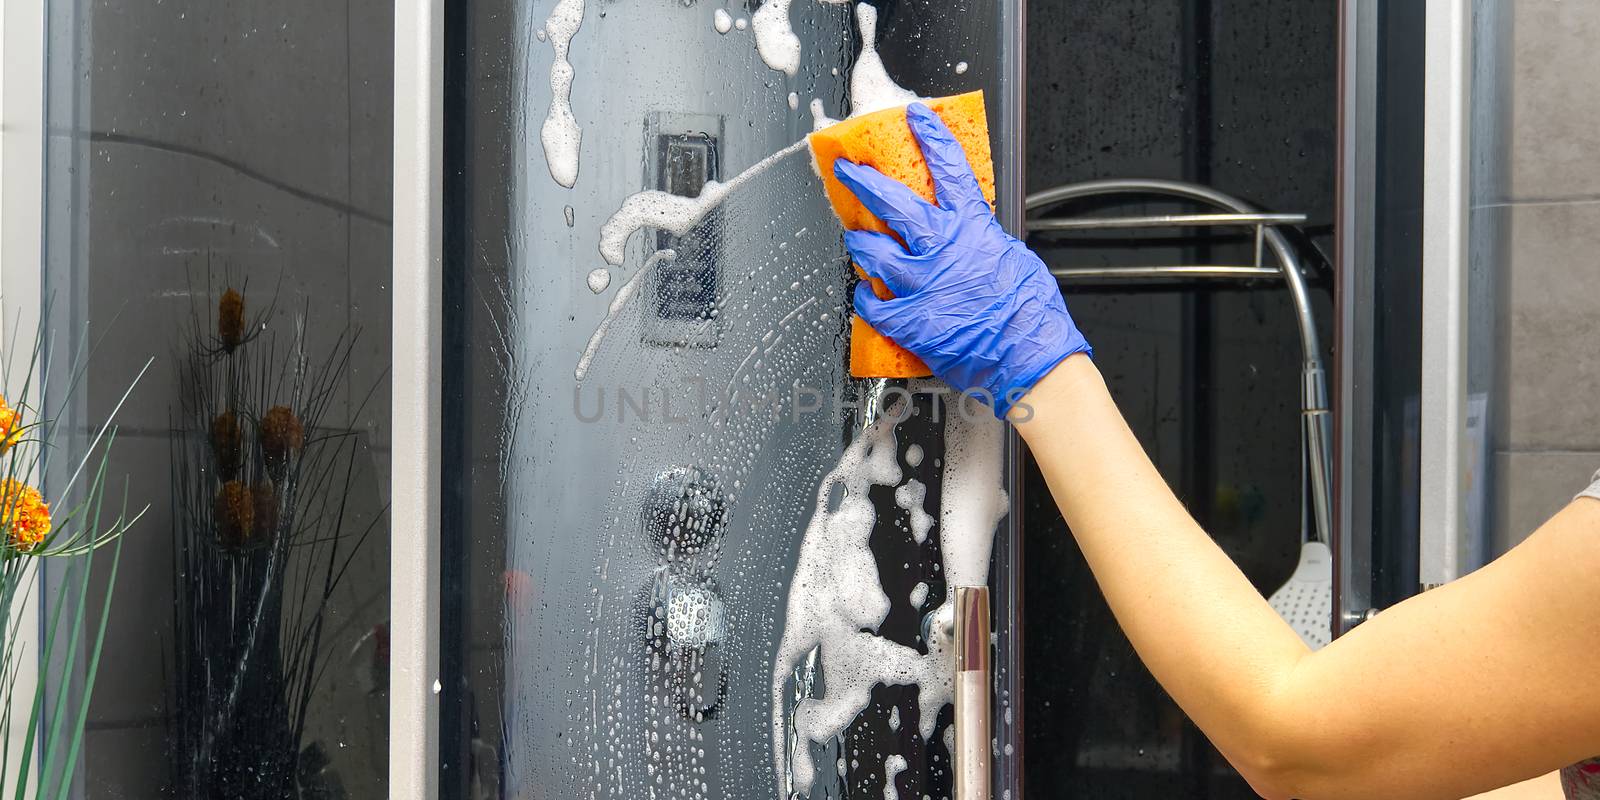 Cleaning of shower steam cabins from Calcium deposits. Cleaning in the bathroom. woman hand in blue gloves with rag and detergent, washing and polishing shower booth from Calcium stone. Maid or housewife cares about house. Commercial cleaning service company concept.